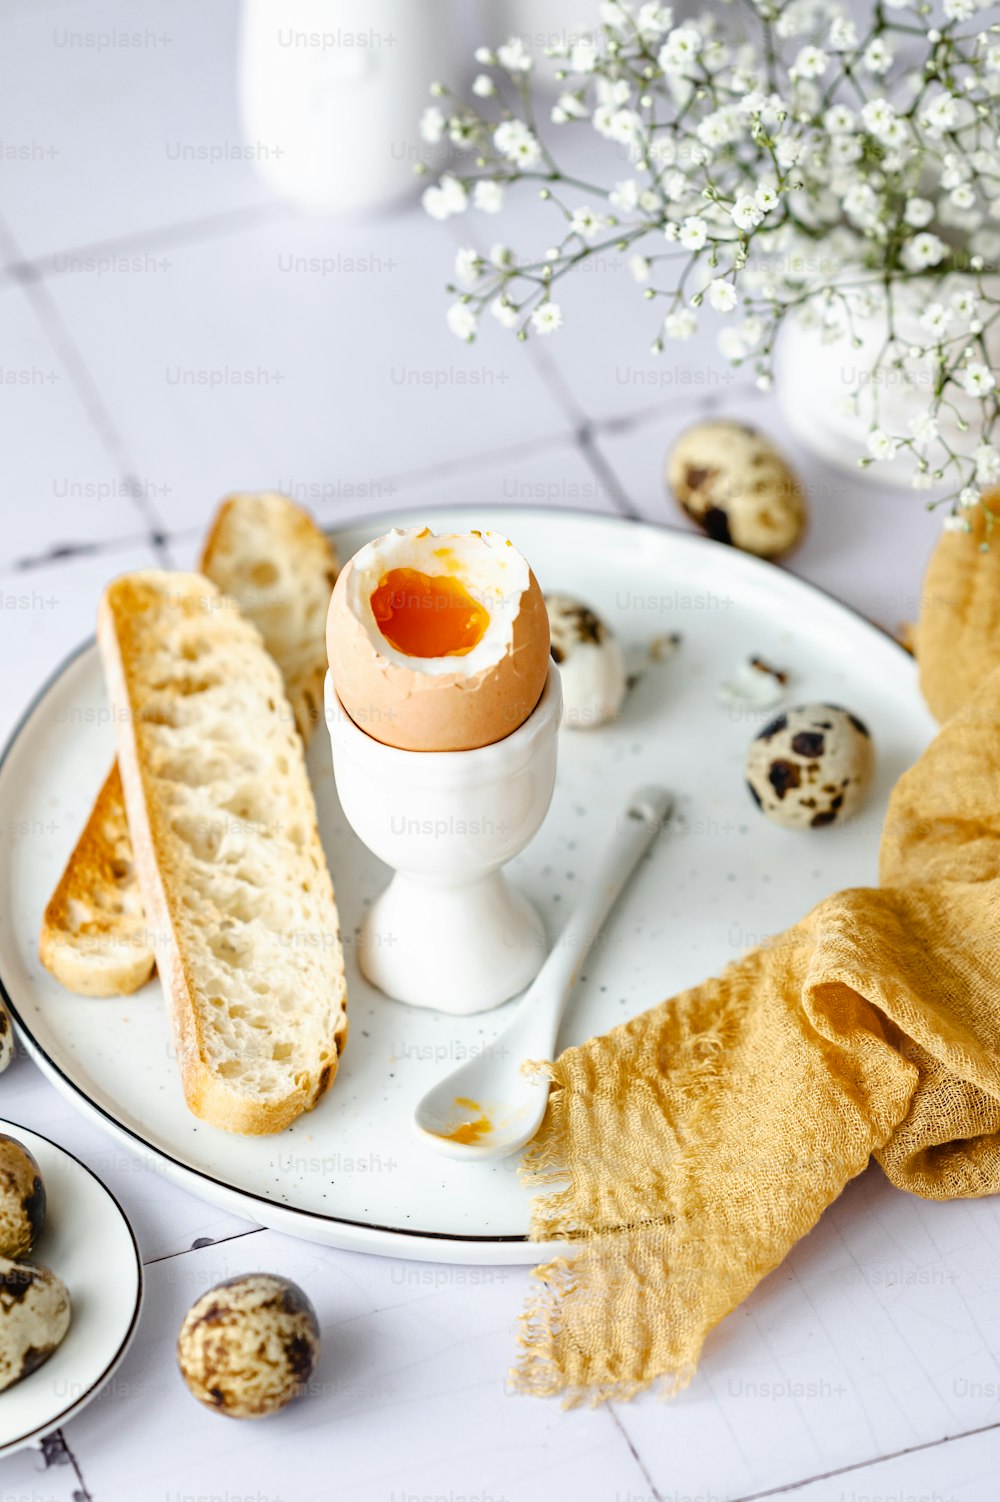 a white plate topped with bread and an egg